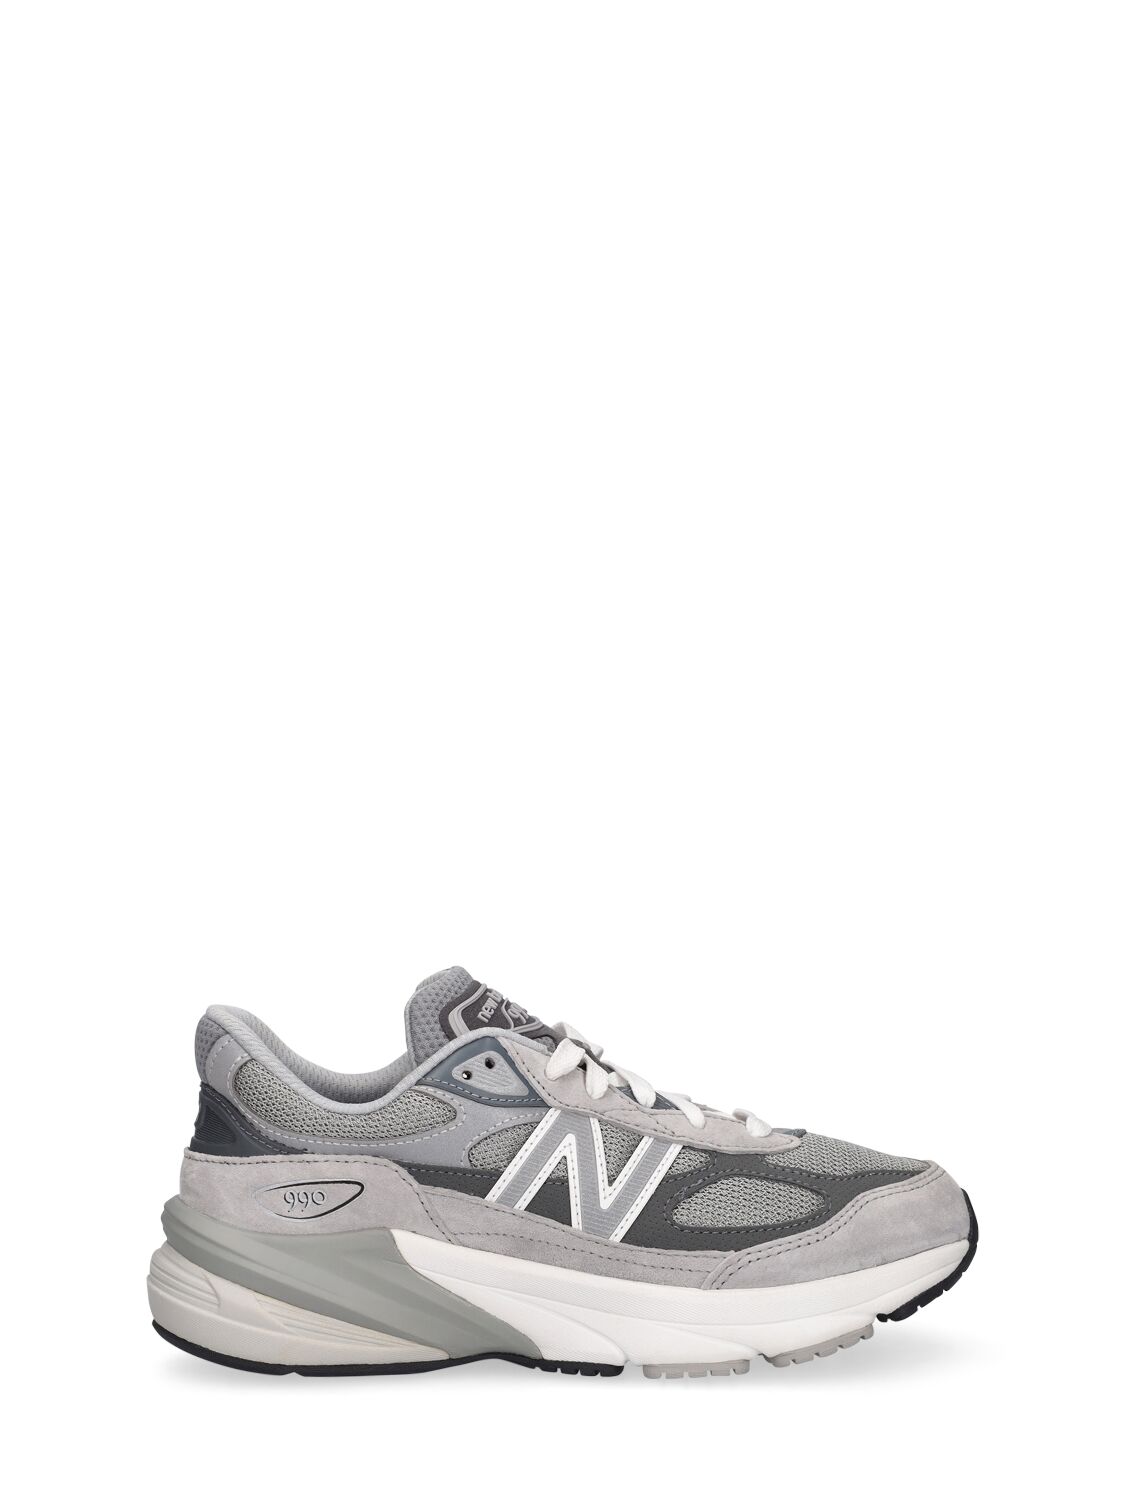 NEW BALANCE 990 V6 LEATHER & MESH SNEAKERS